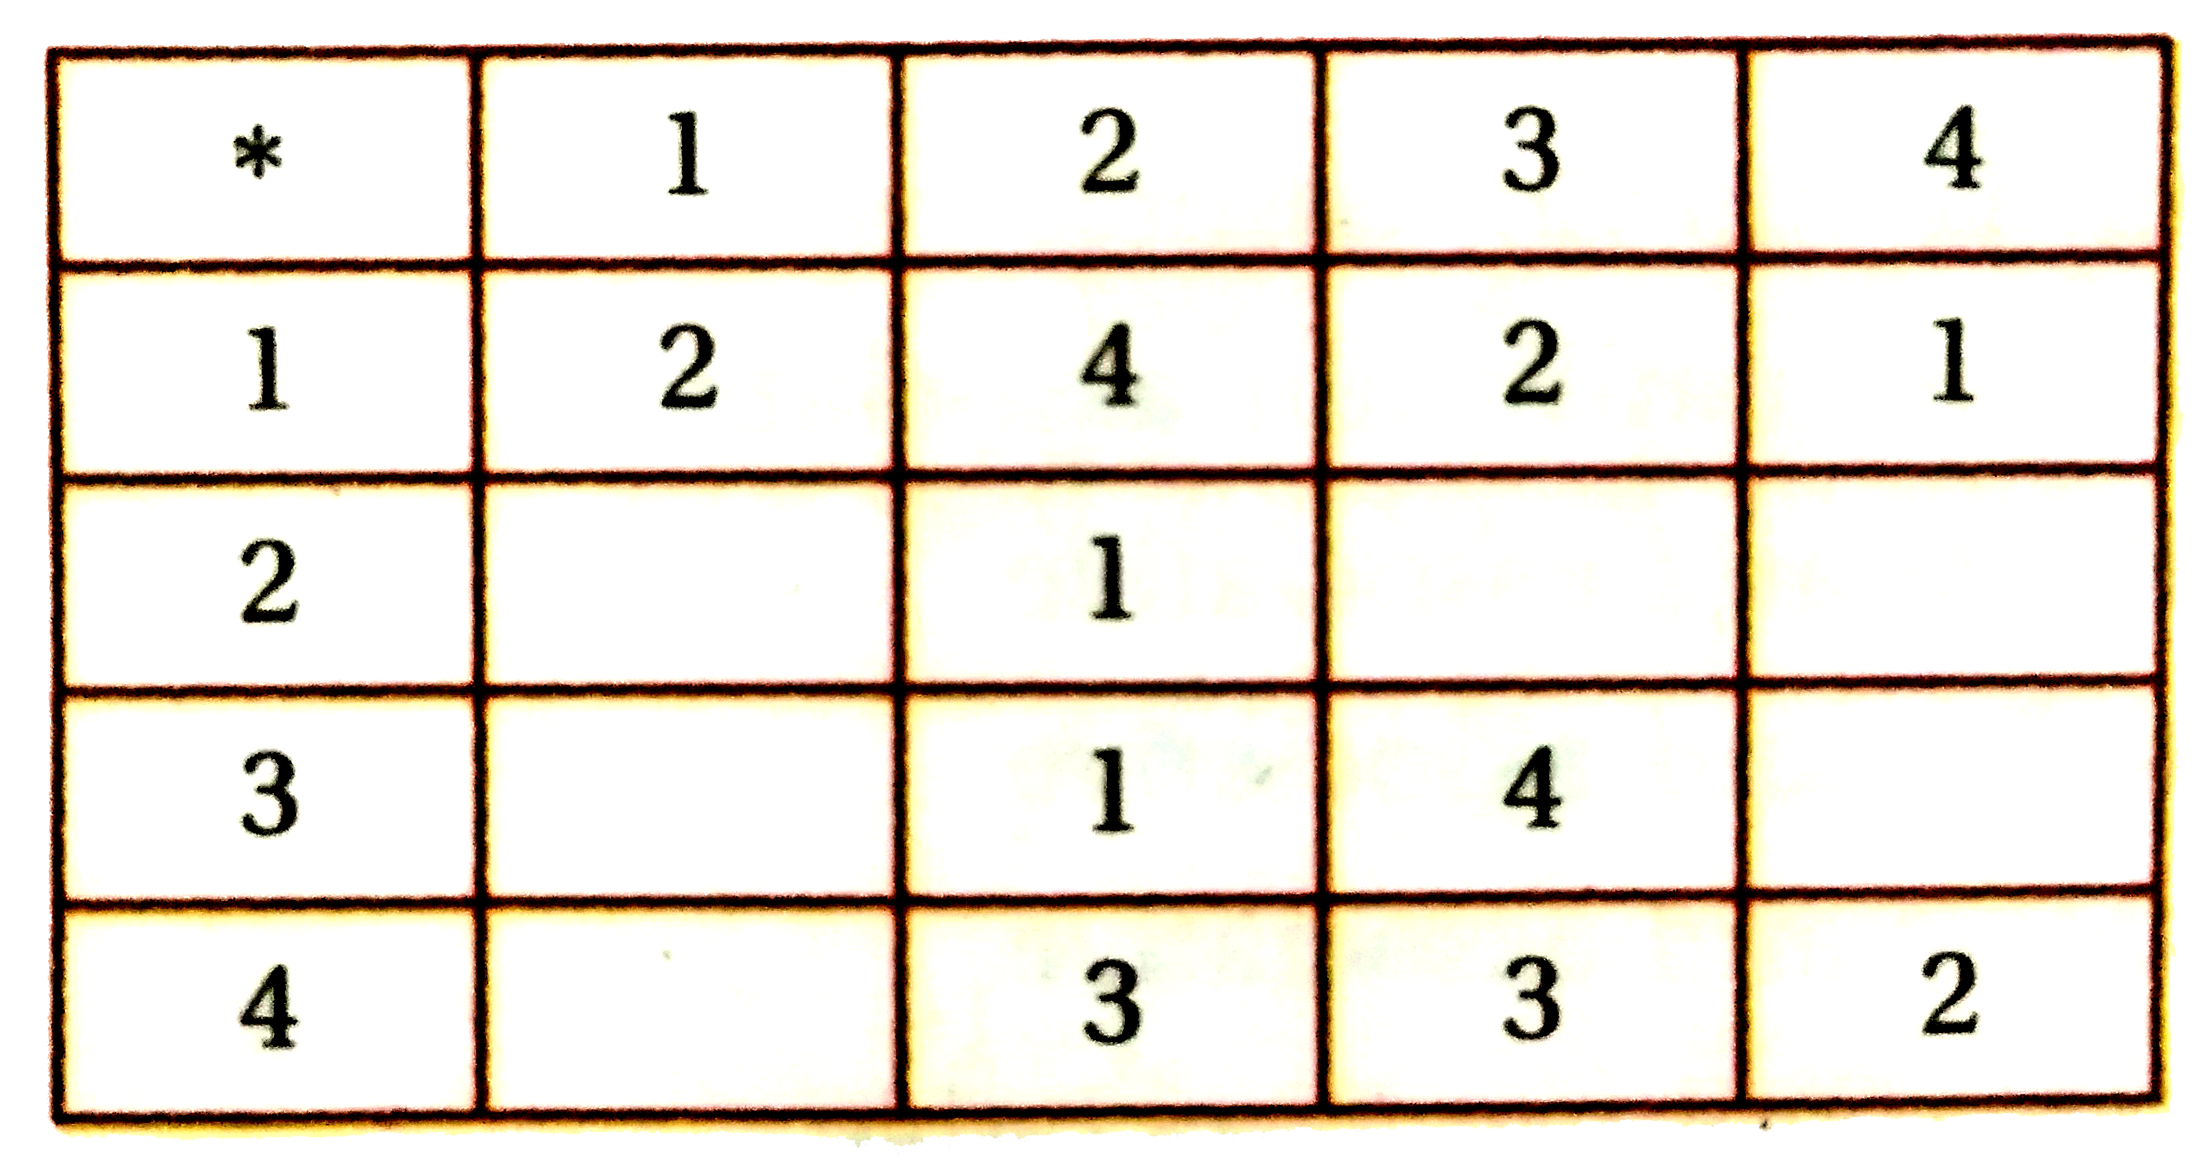 Complete the following nultiplication table so as to define a commutative binary operation ** on A={1,2,3,4}.